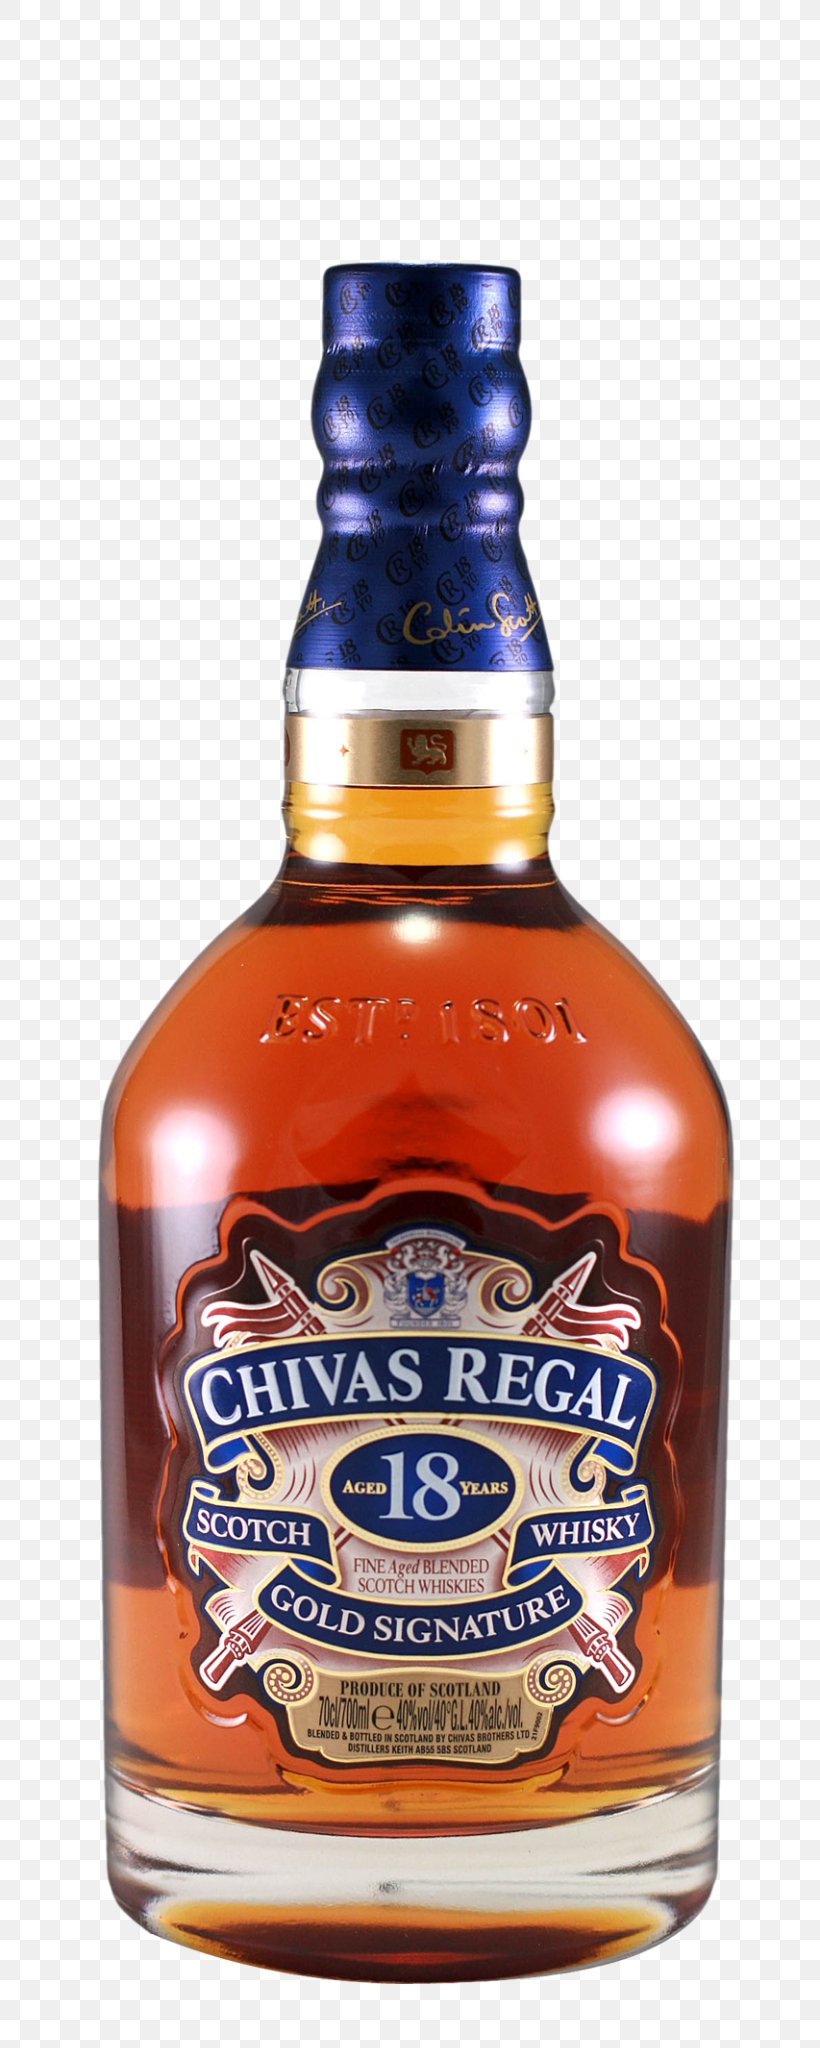 Chivas Regal Scotch Whisky Blended Whiskey Single Malt Whisky, PNG, 800x2048px, Chivas Regal, Alcohol By Volume, Alcoholic Beverage, Blended Malt Whisky, Blended Whiskey Download Free